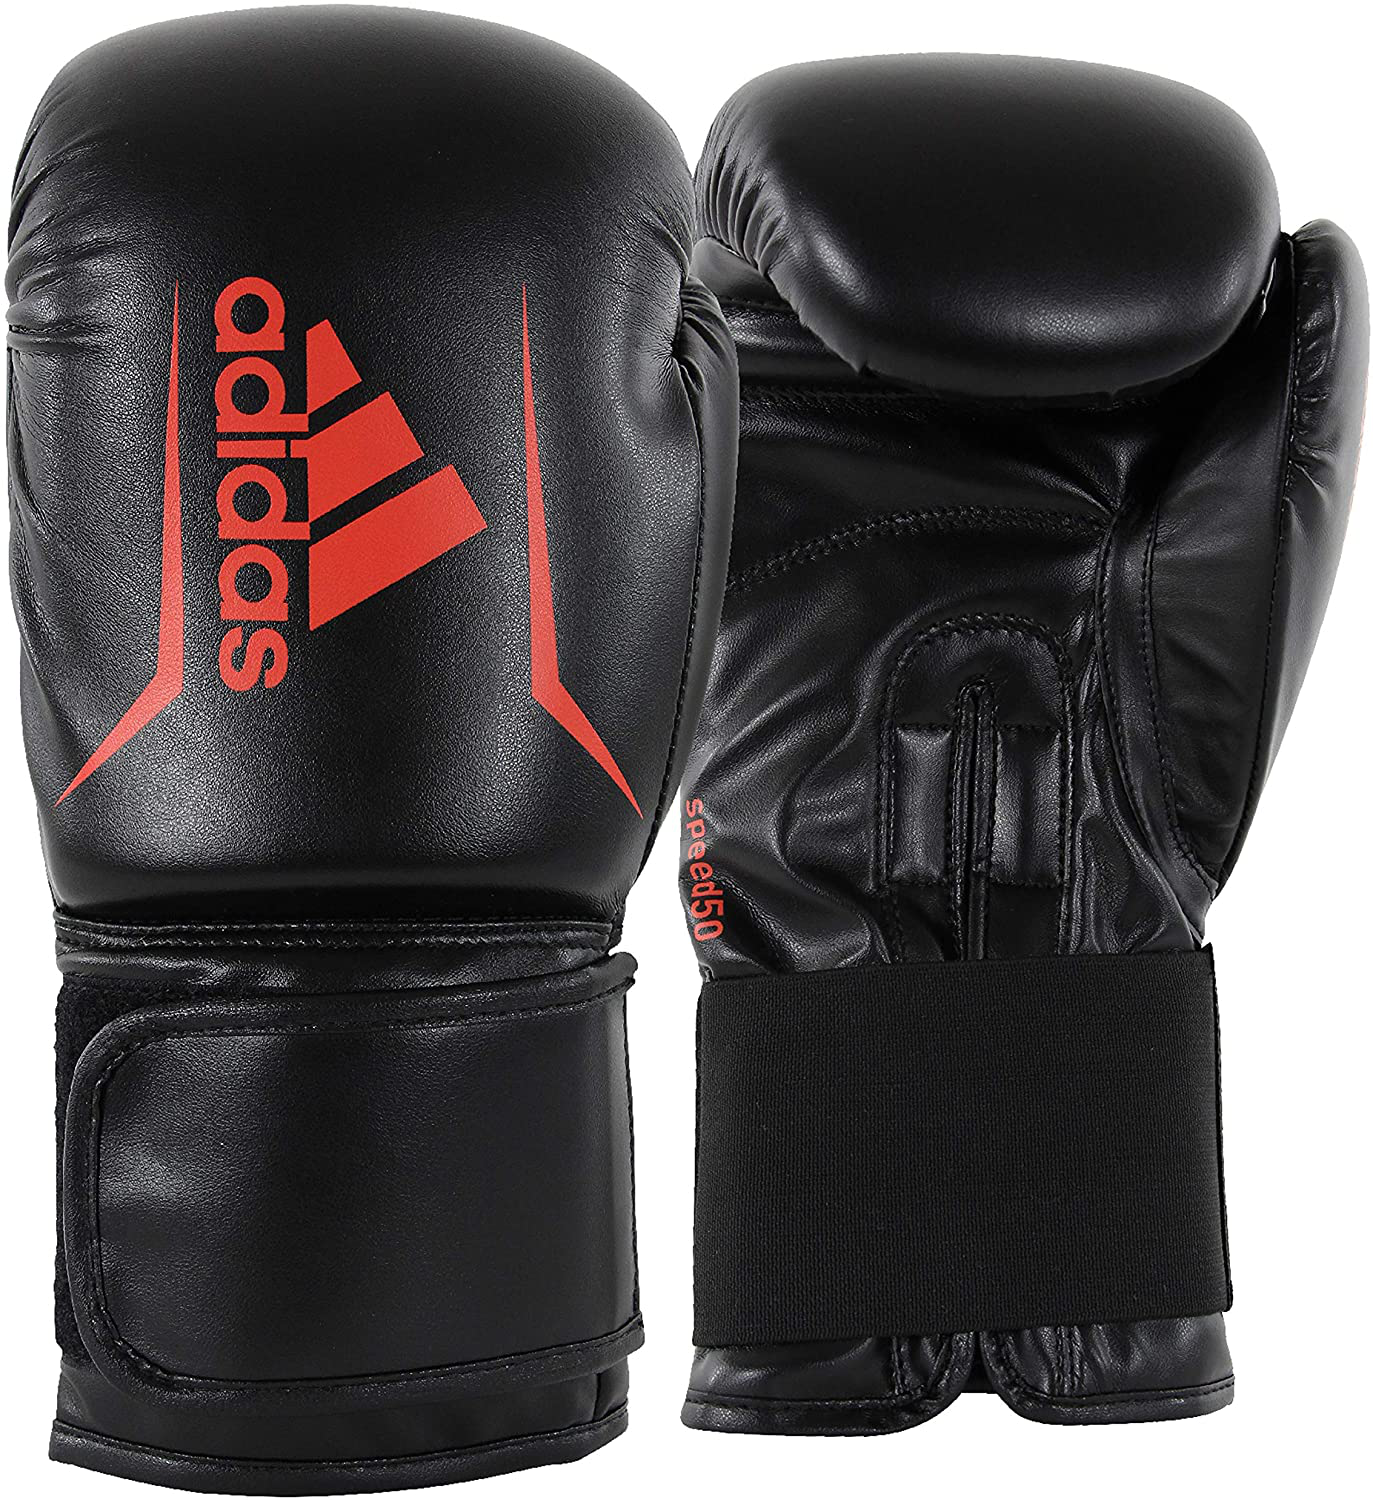 Boxing Boxing 50 Kickboxing 3.0 Gloves Speed & FightersShop Adidas — FLX for Men/Wome